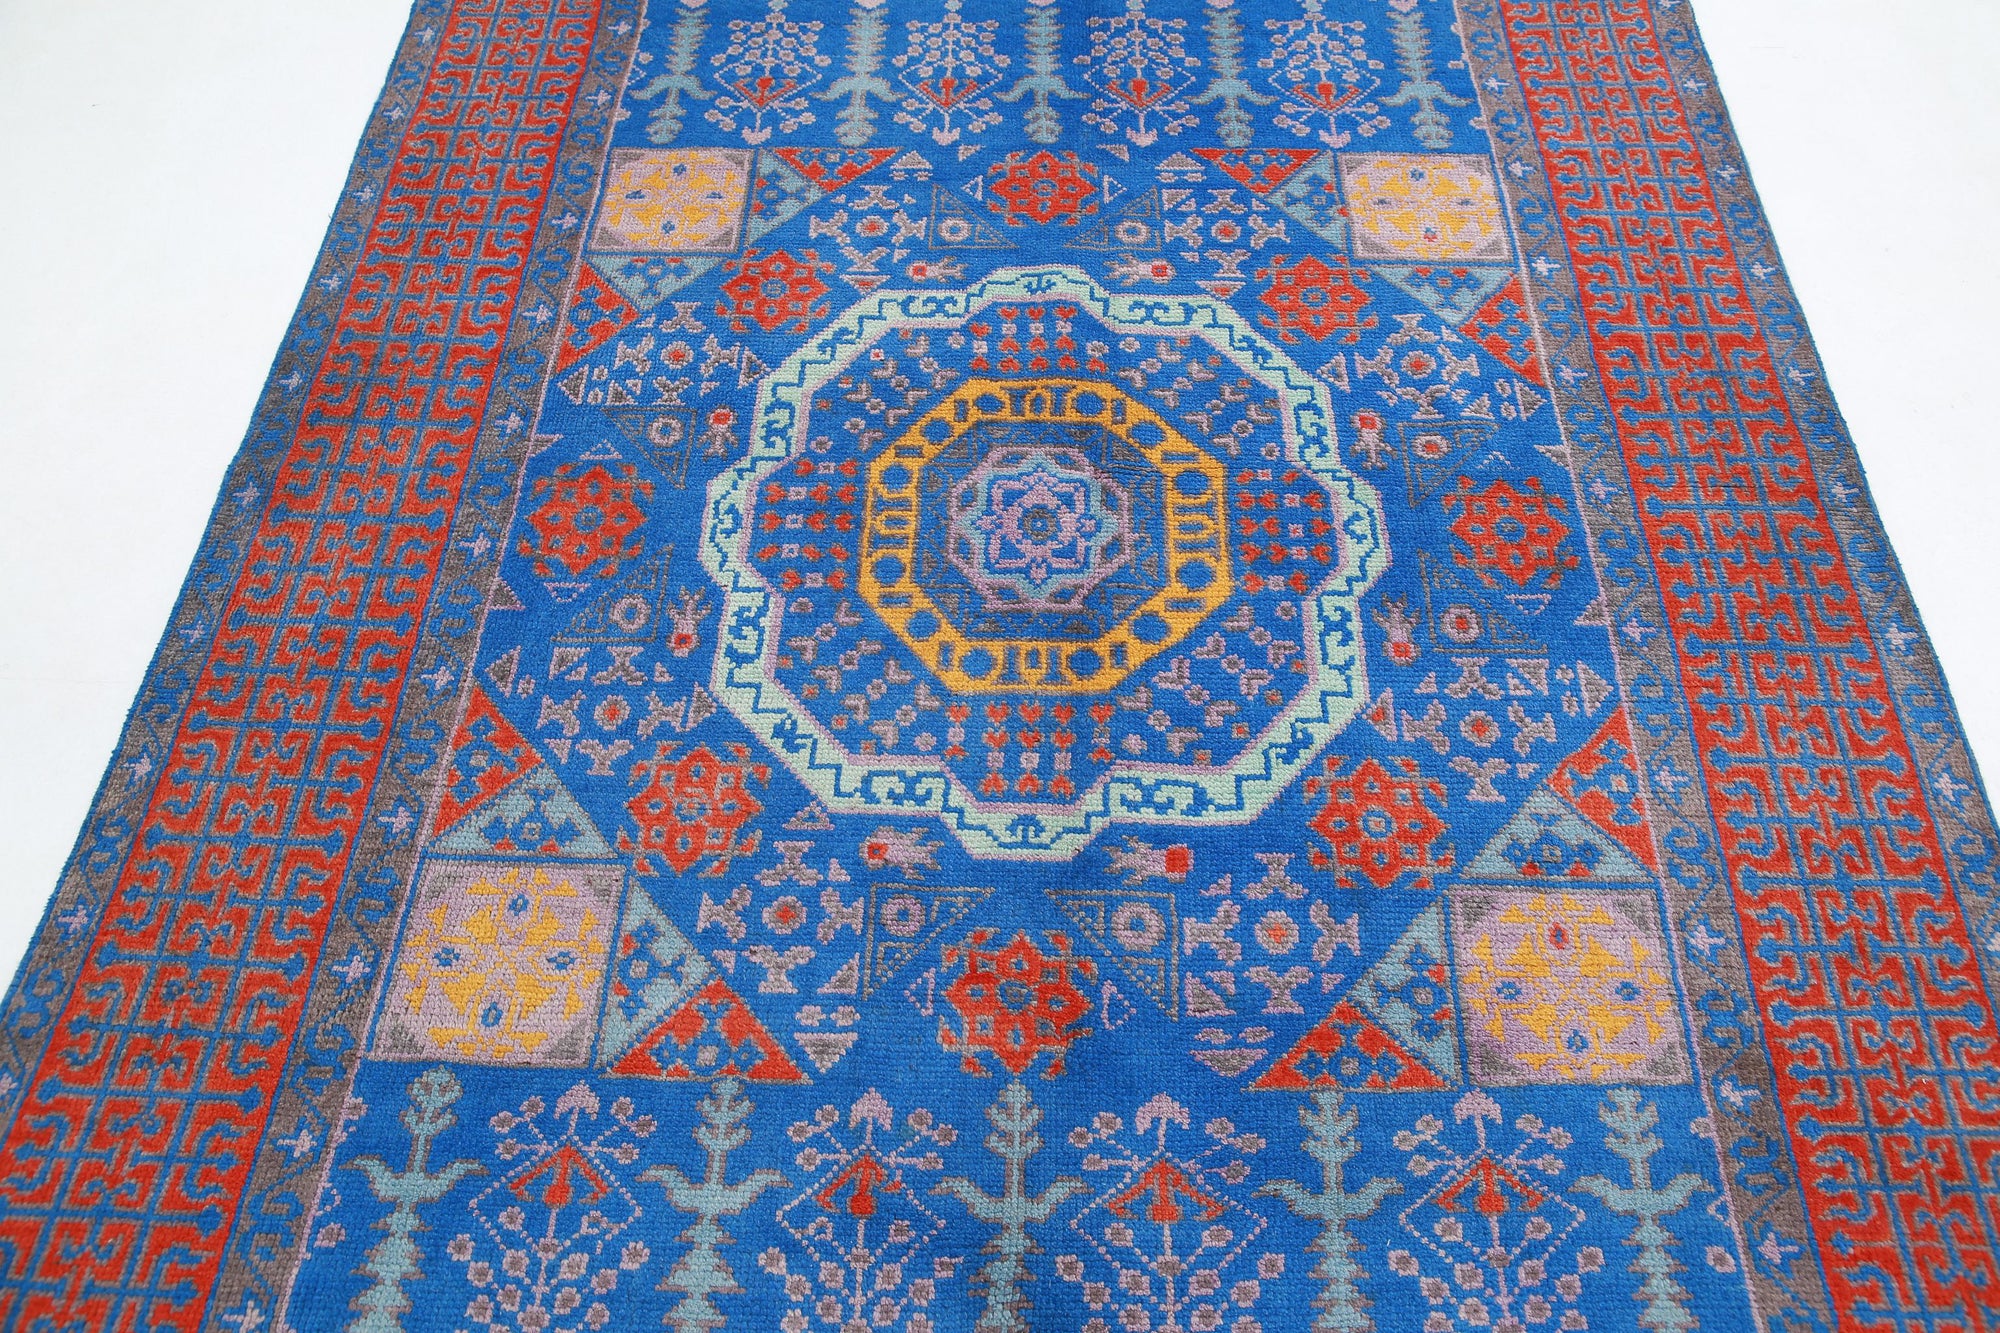 Revival-hand-knotted-qarghani-wool-rug-5014225-4.jpg